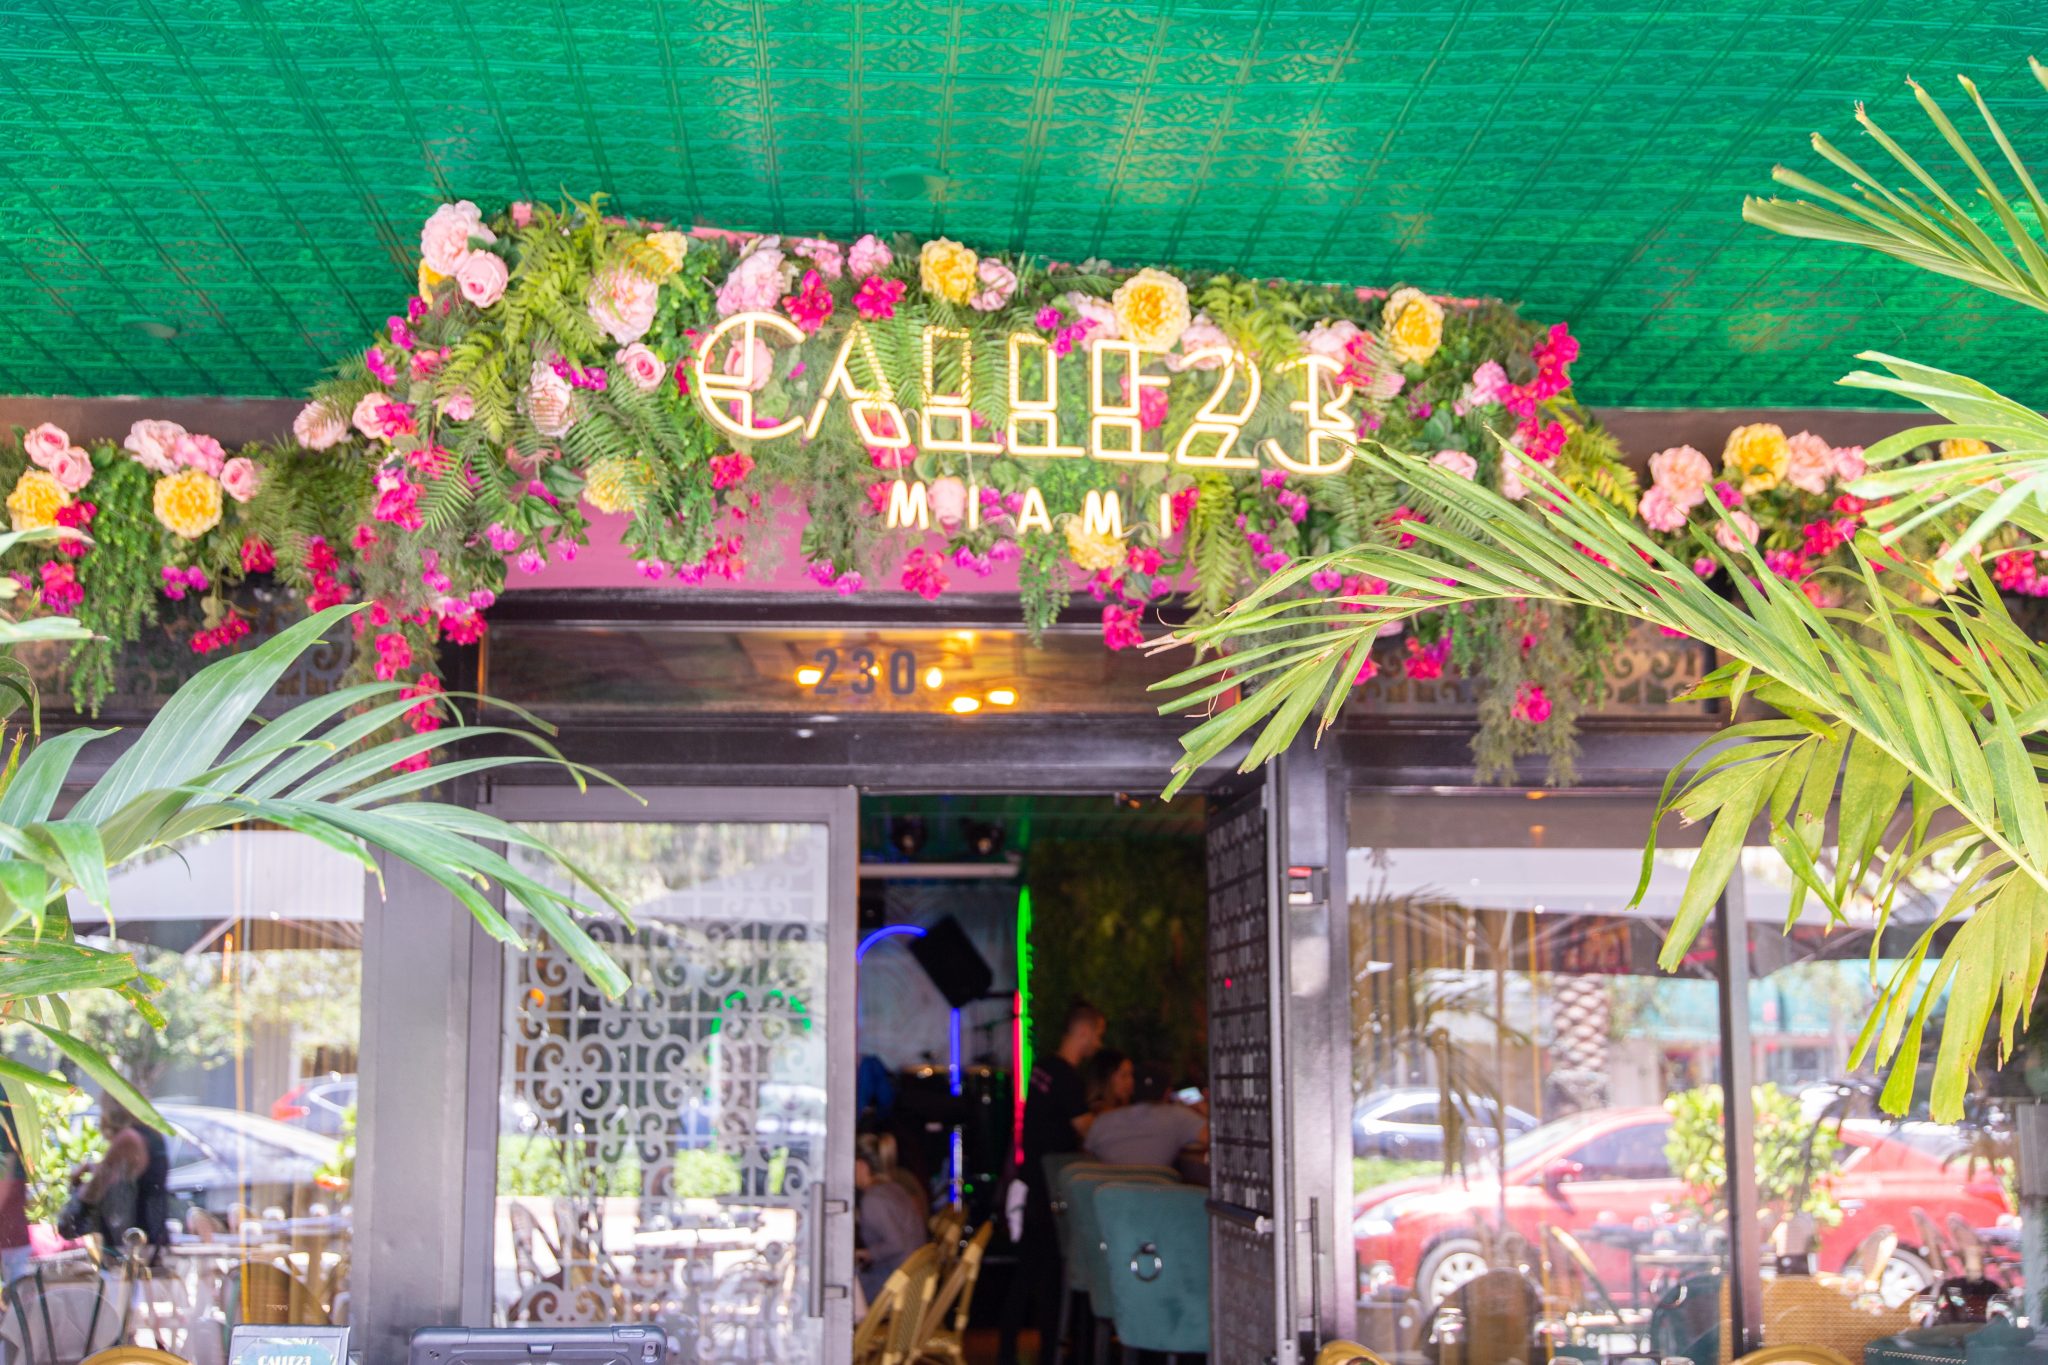 Inside Look: Brunch at Calle 23 in Miami, FL